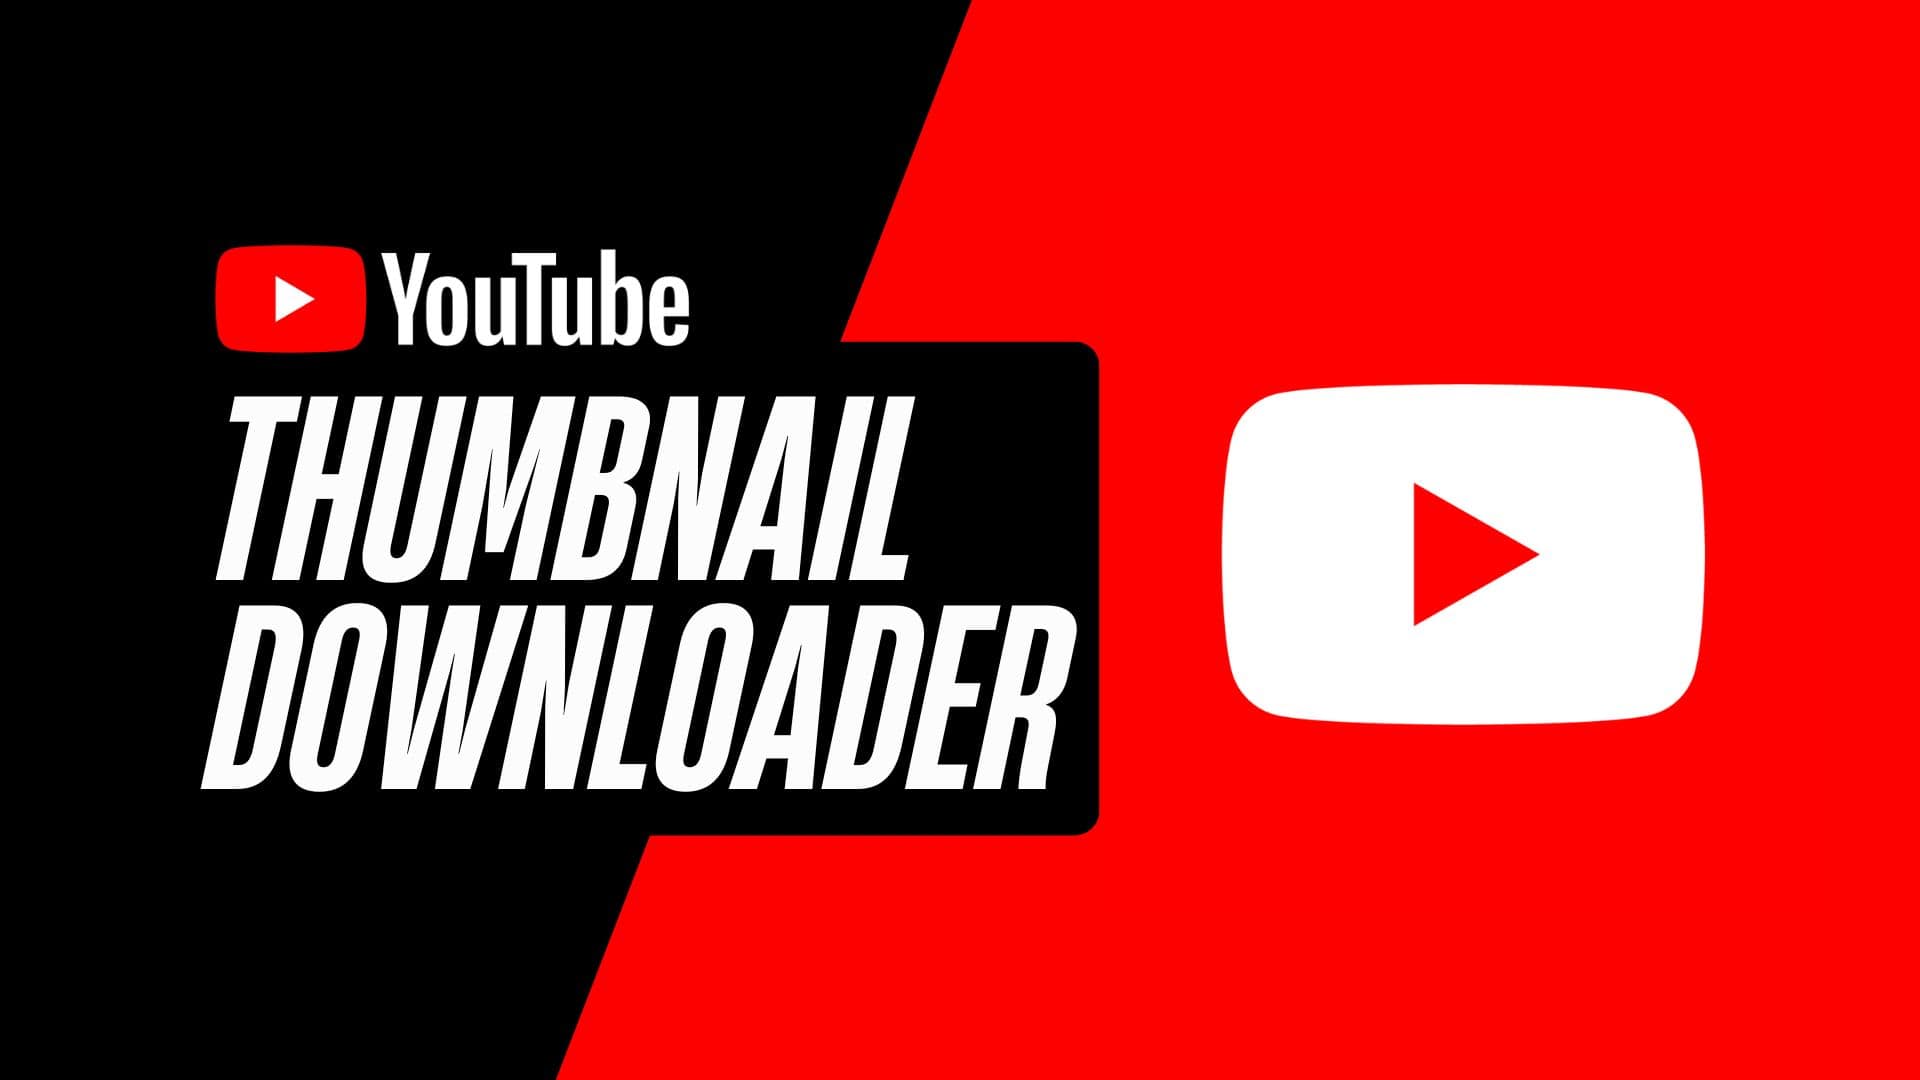 How to Download YouTube Video Thumbnails